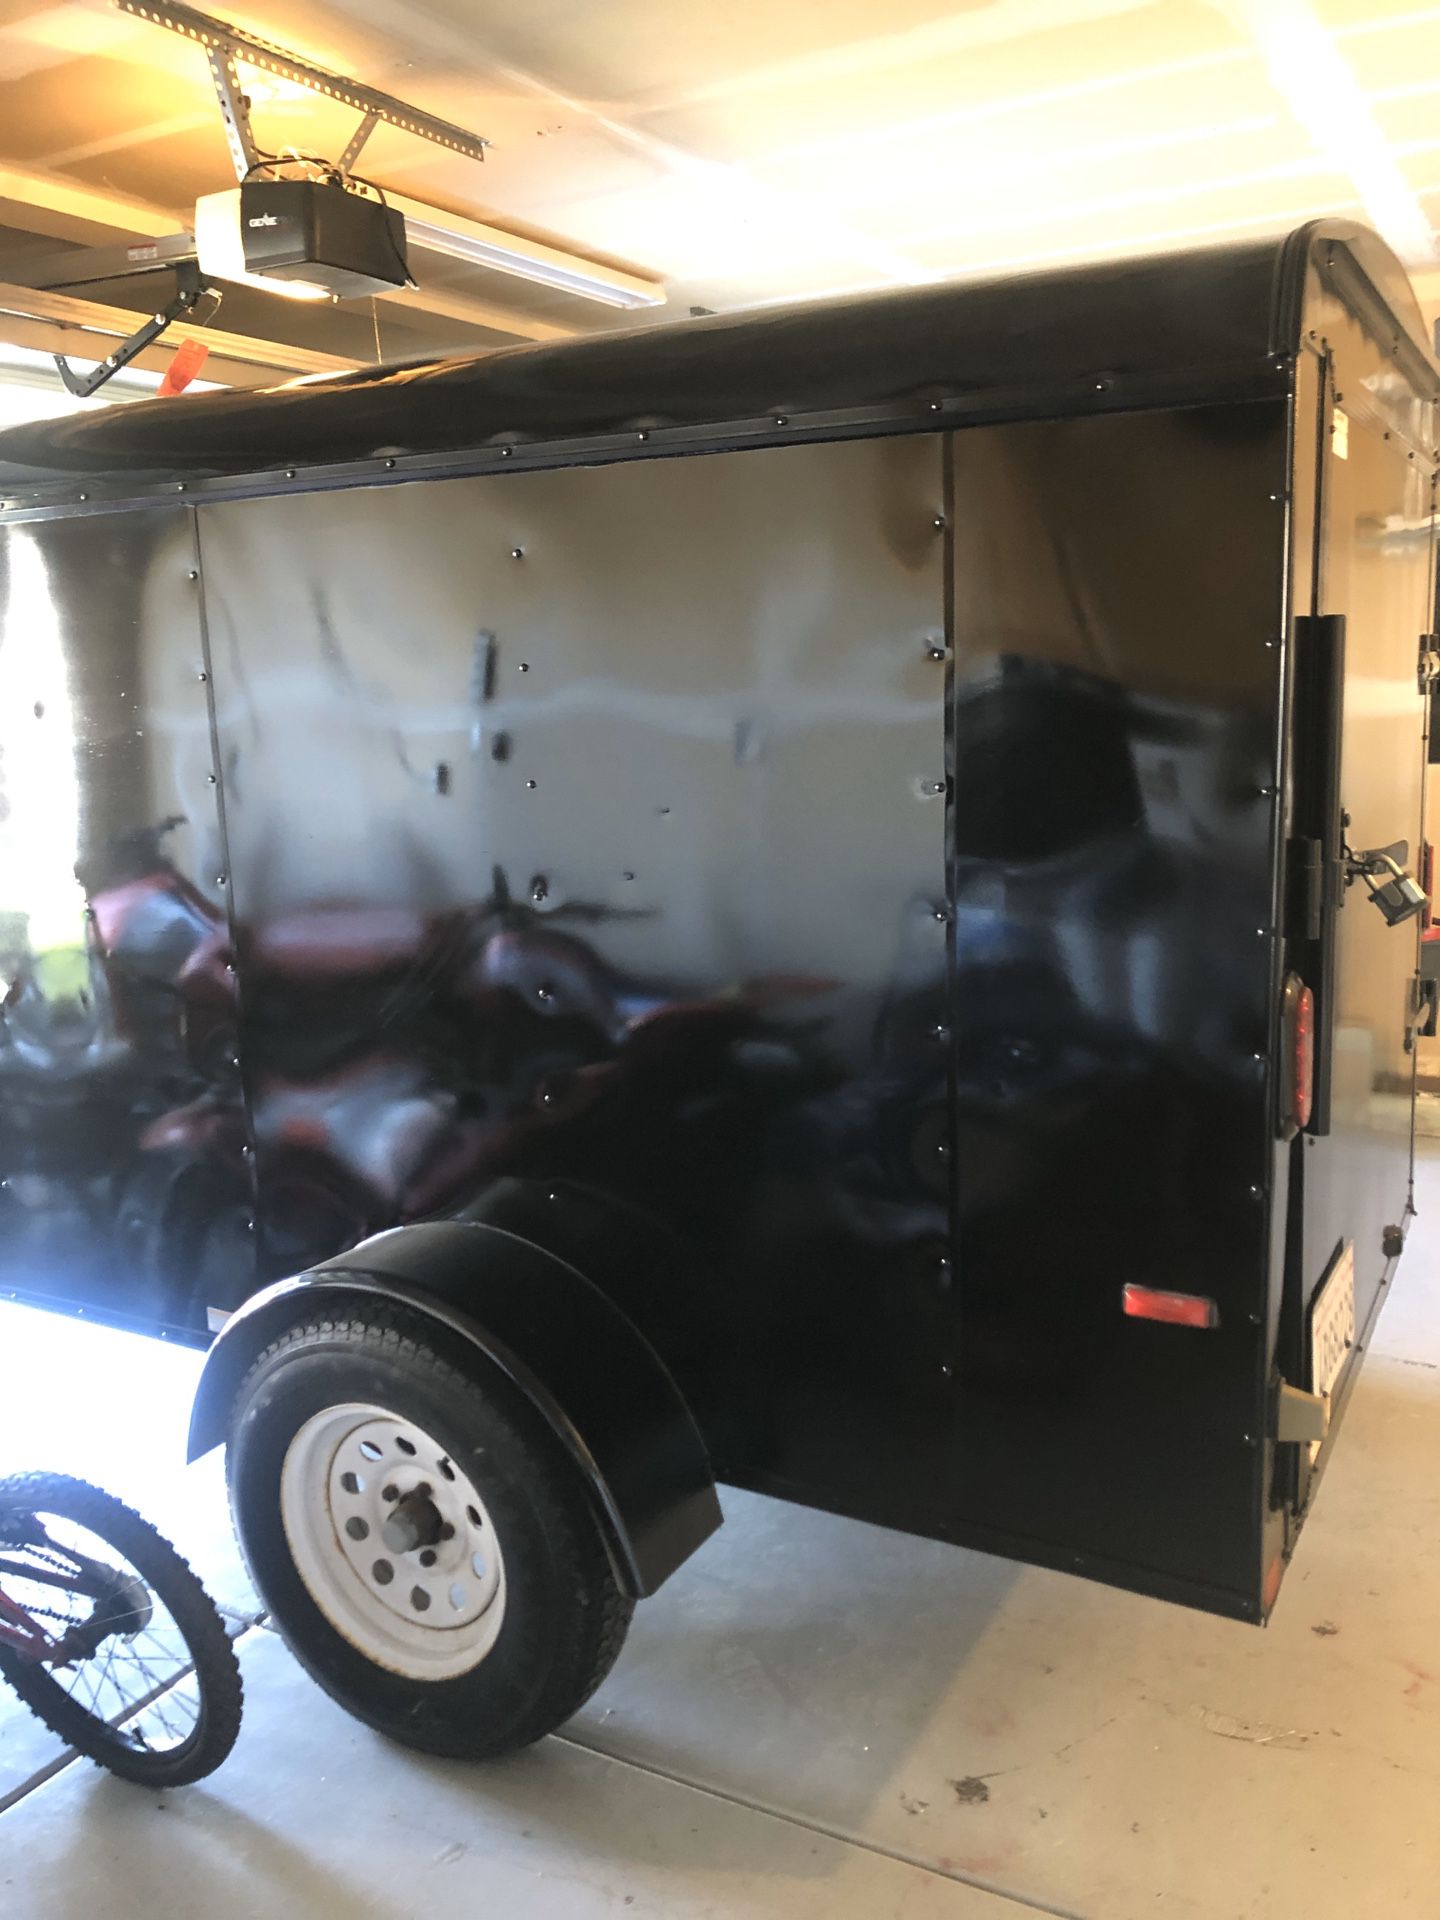 2019 utility trailer MUST GO TODAY TODAY 2019